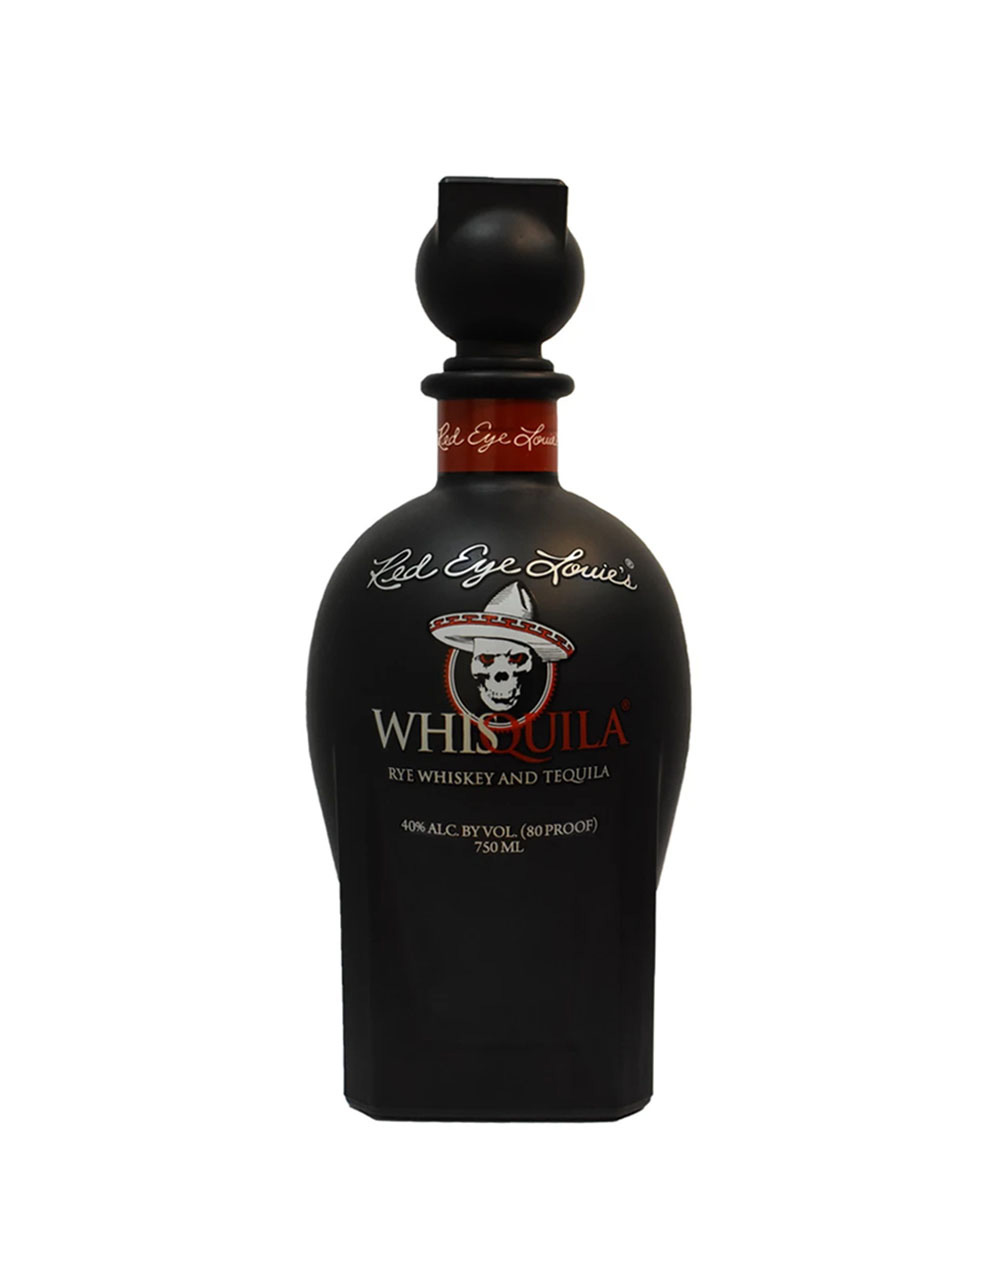 Whisquila Red Eye Louie's